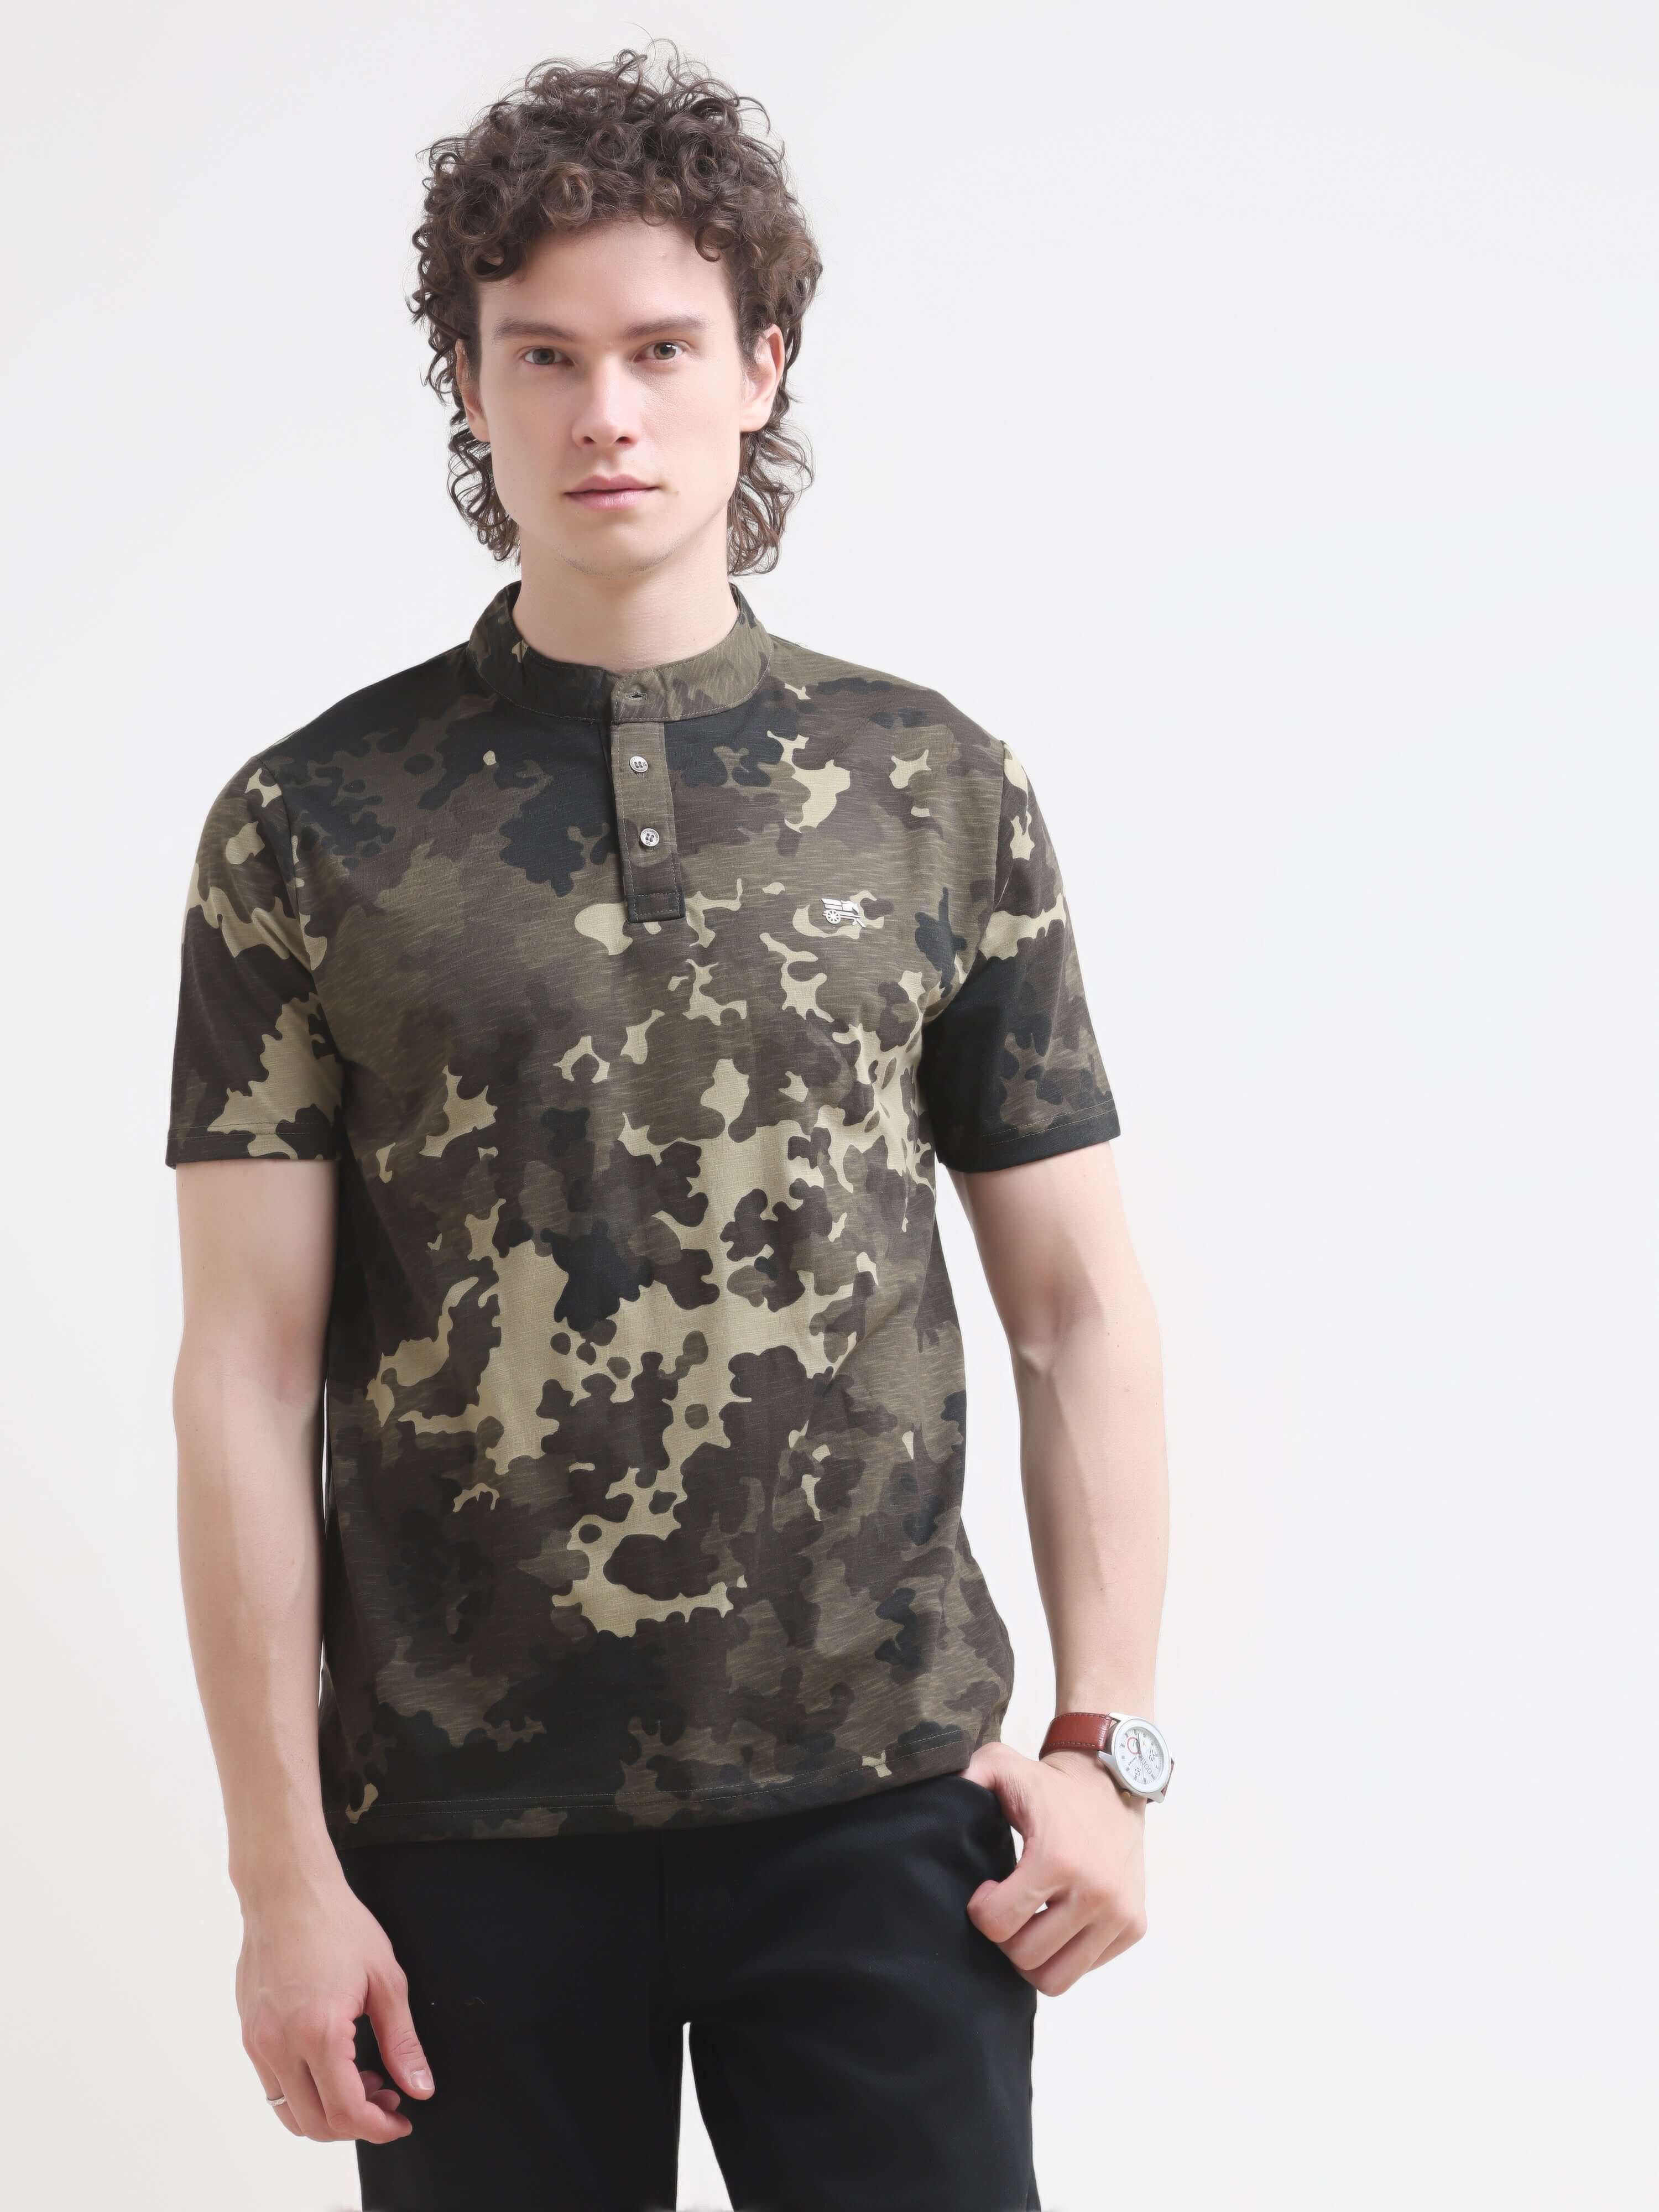 Olive Henley Camouflage T-Shirt for Men - New Arrival shop online at Estilocus. Shop the latest men's casual summer essential: Olive Henley Camo Tee. 100% cotton, lightweight, comfortable fit. Order now!